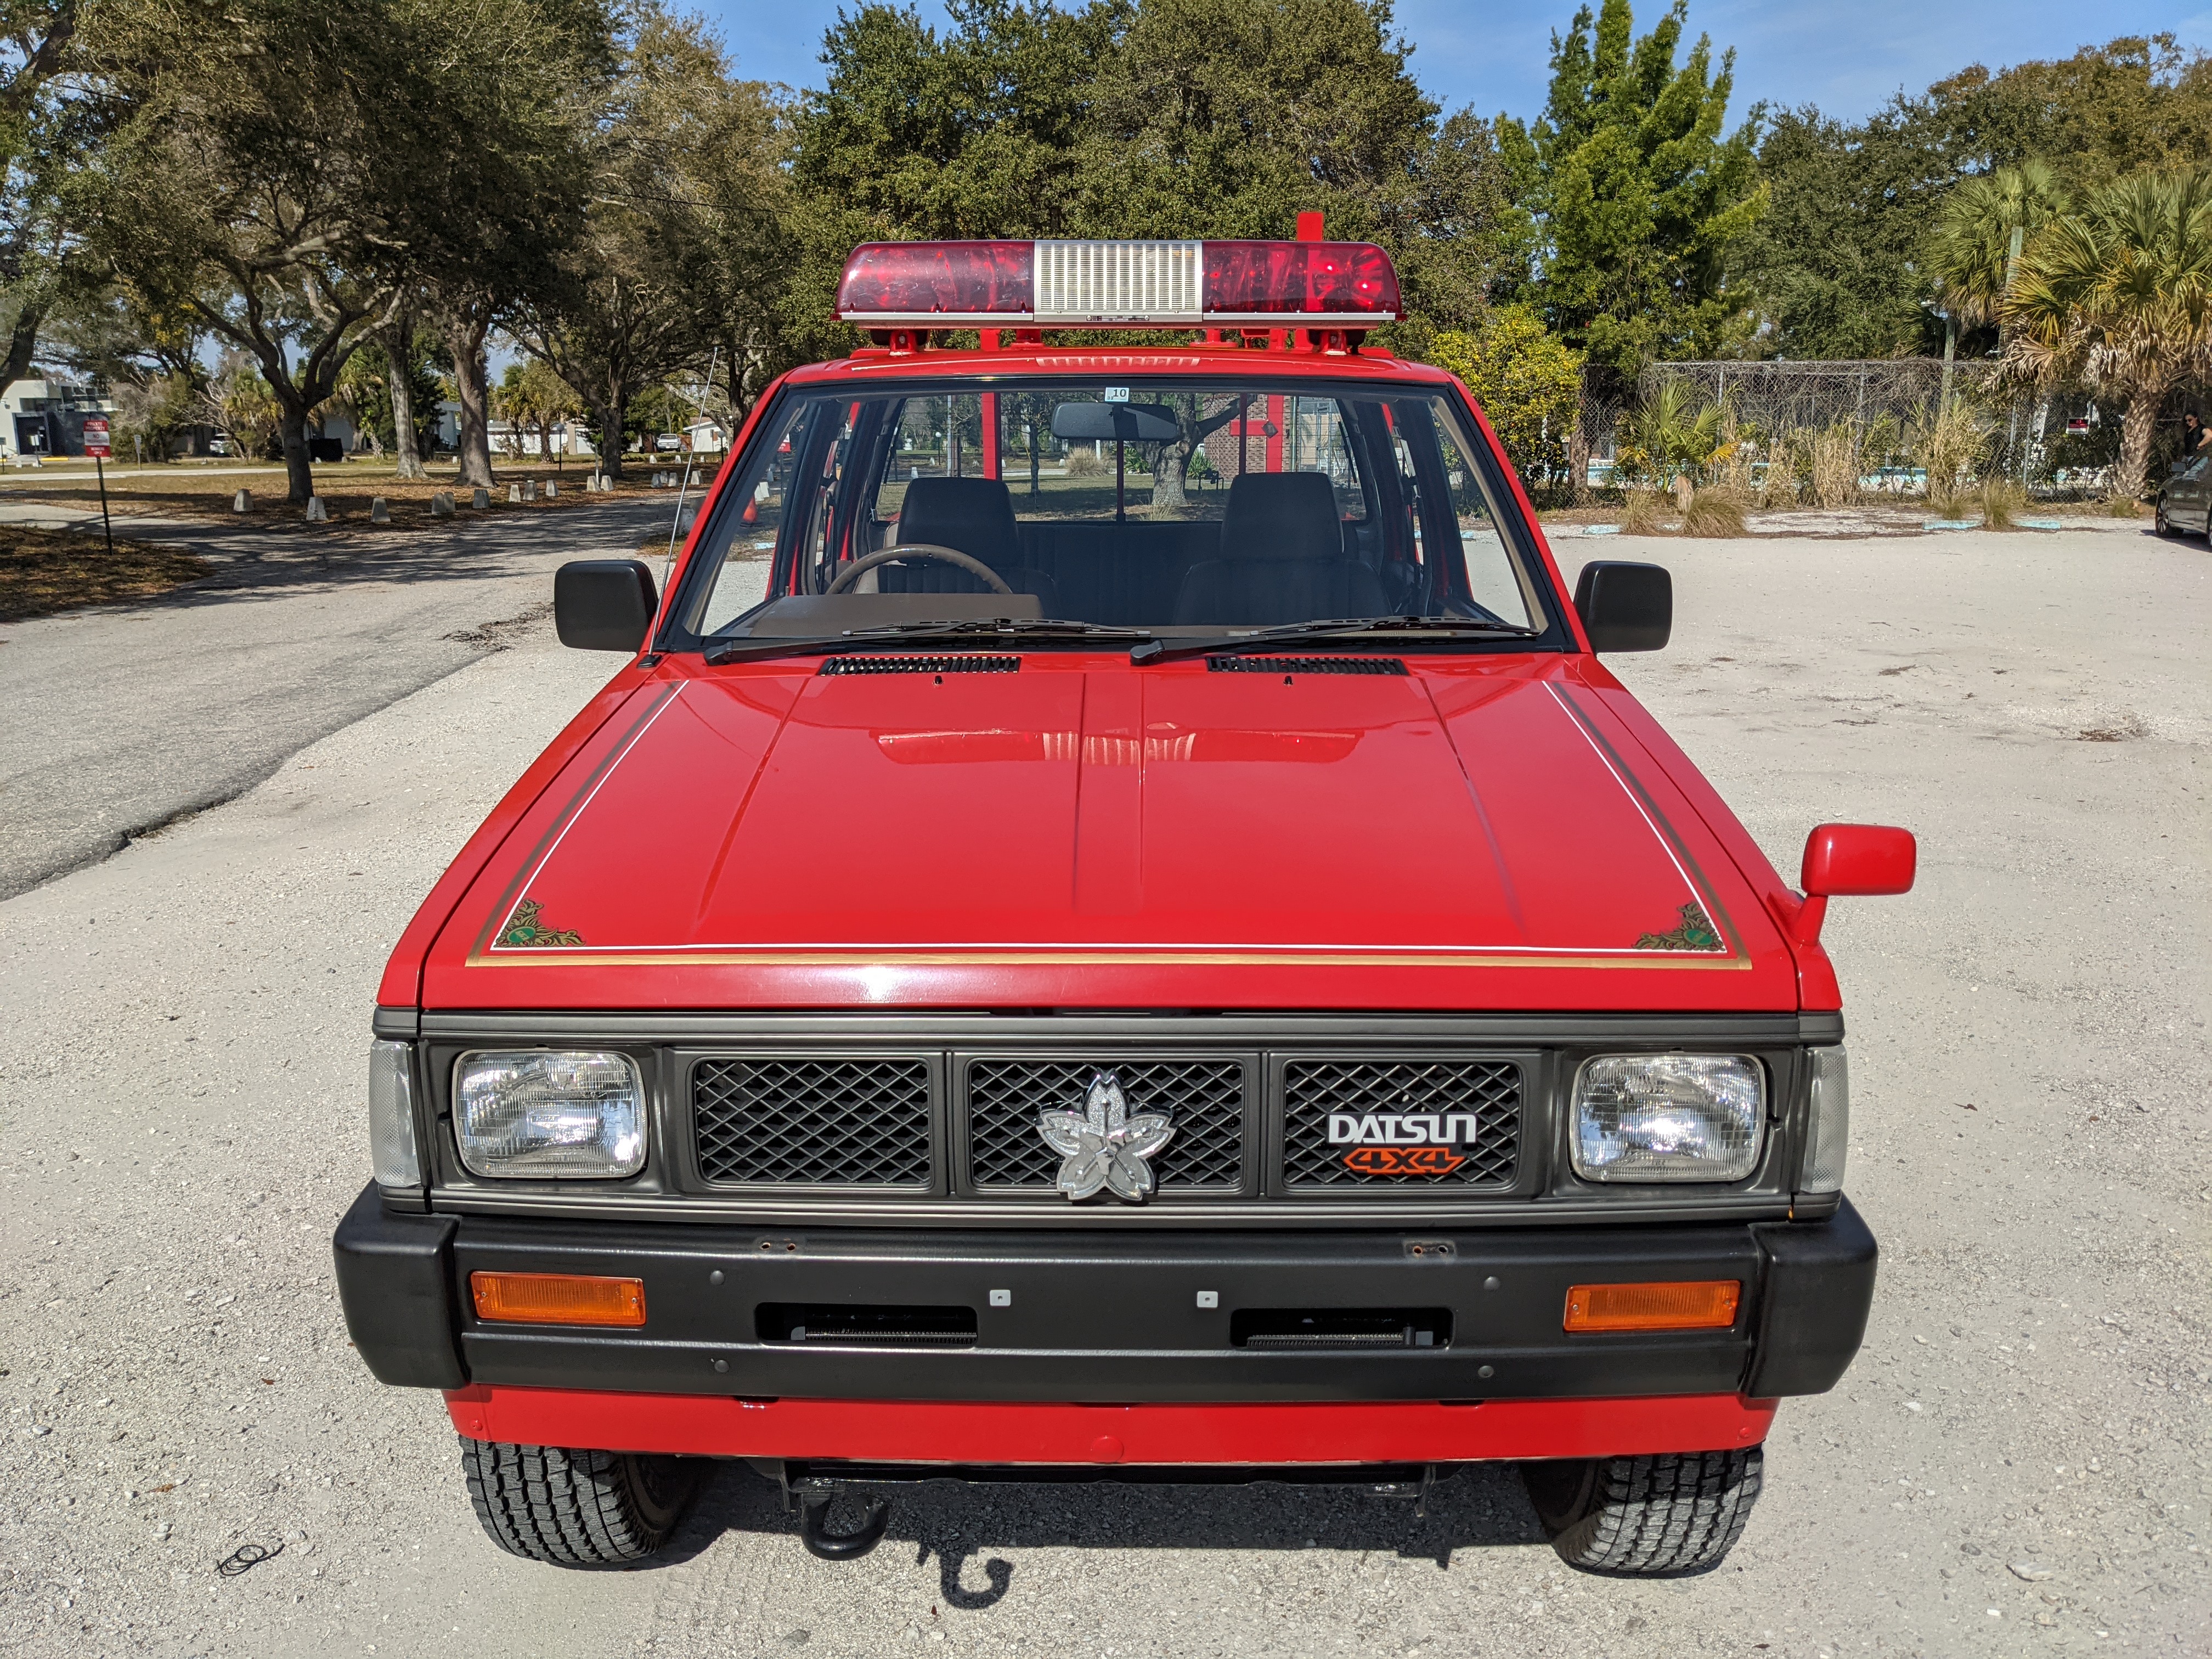 1992 Nissan Datsun Pickup QMD21-424254 Fire Truck - Limerence 